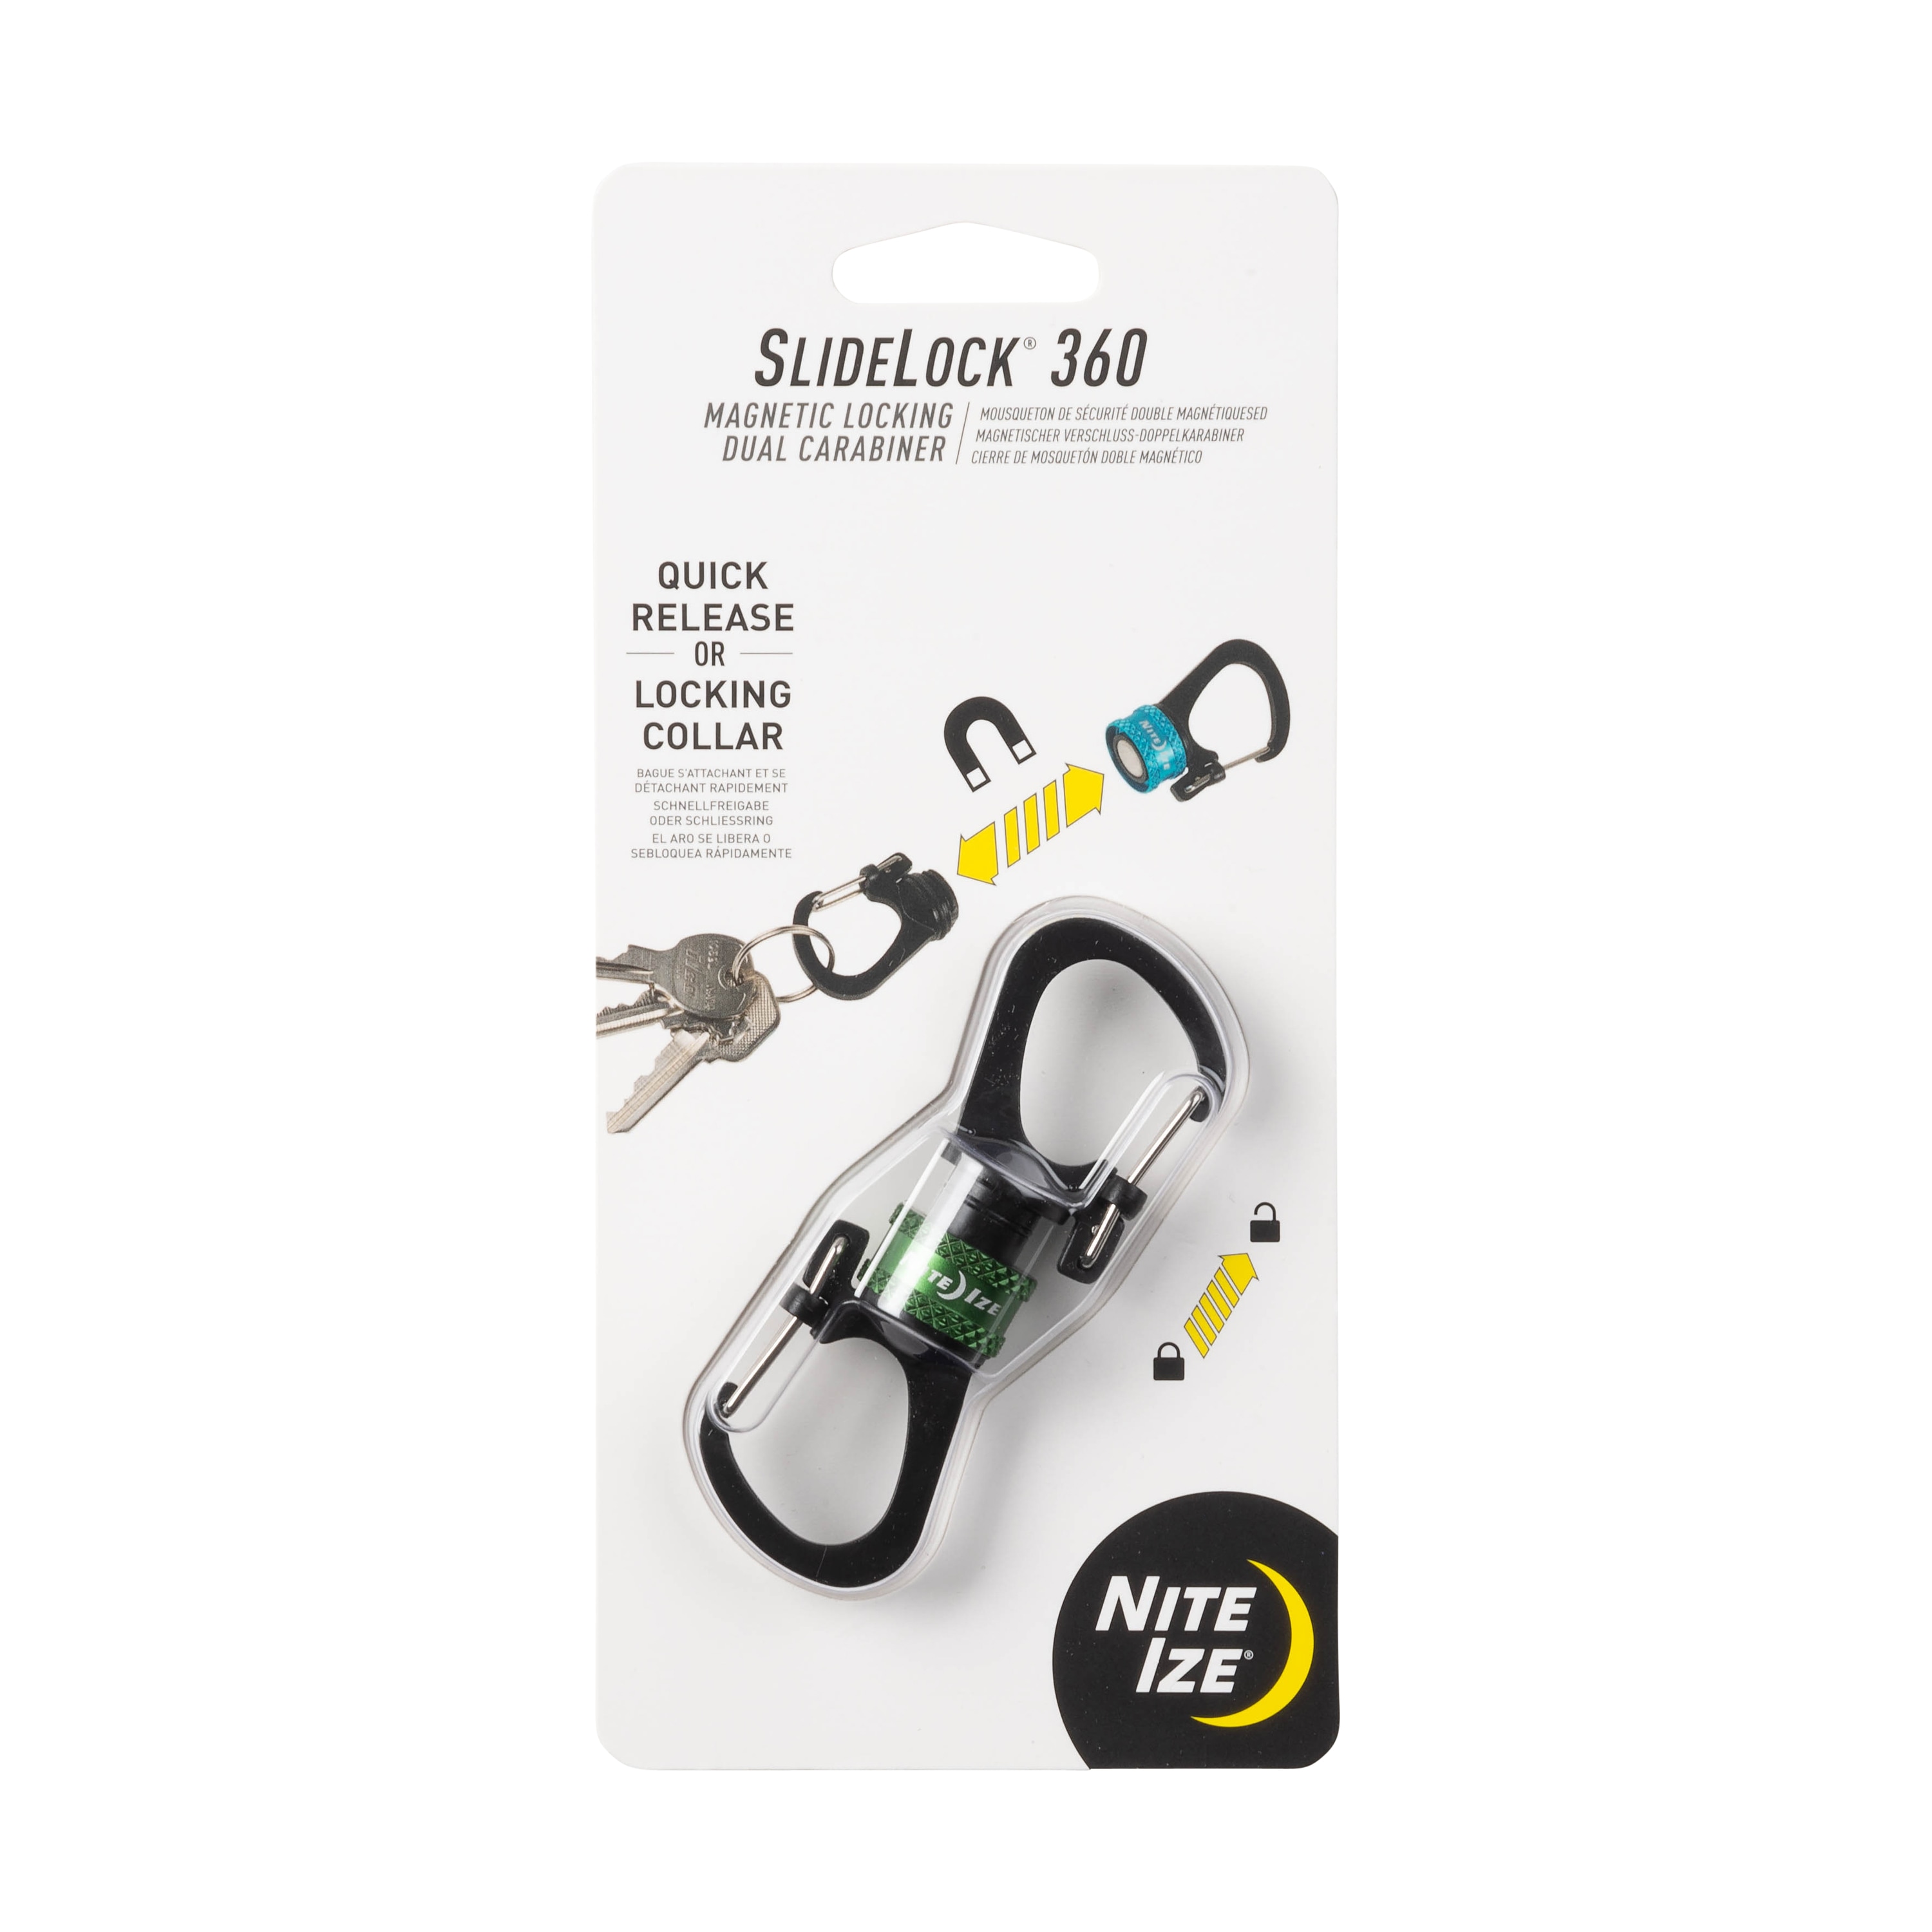 Nite Ize SlideLock 360 Magnetic Locking Dual Carabiner - Olive, Stainless  Steel Key Control Accessory